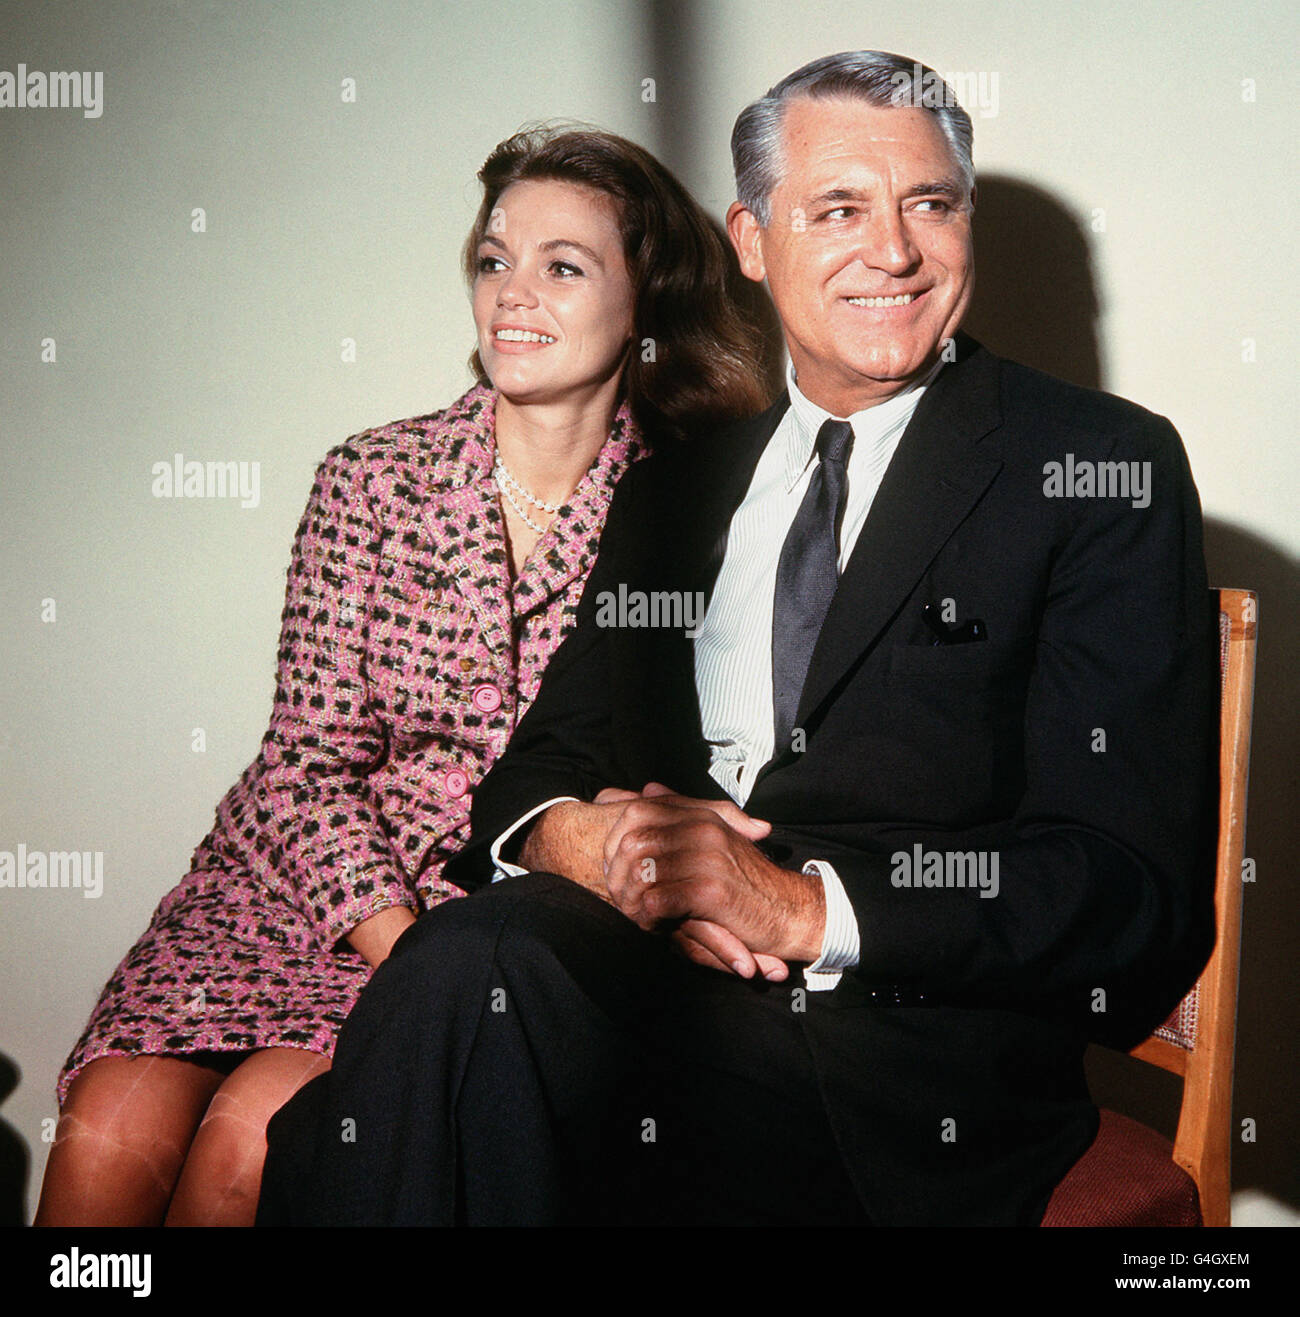 American actor Cary Grant and his 29 year old wife, former actress Dyan Cannon, at the Savoy Hotel, London. Stock Photo